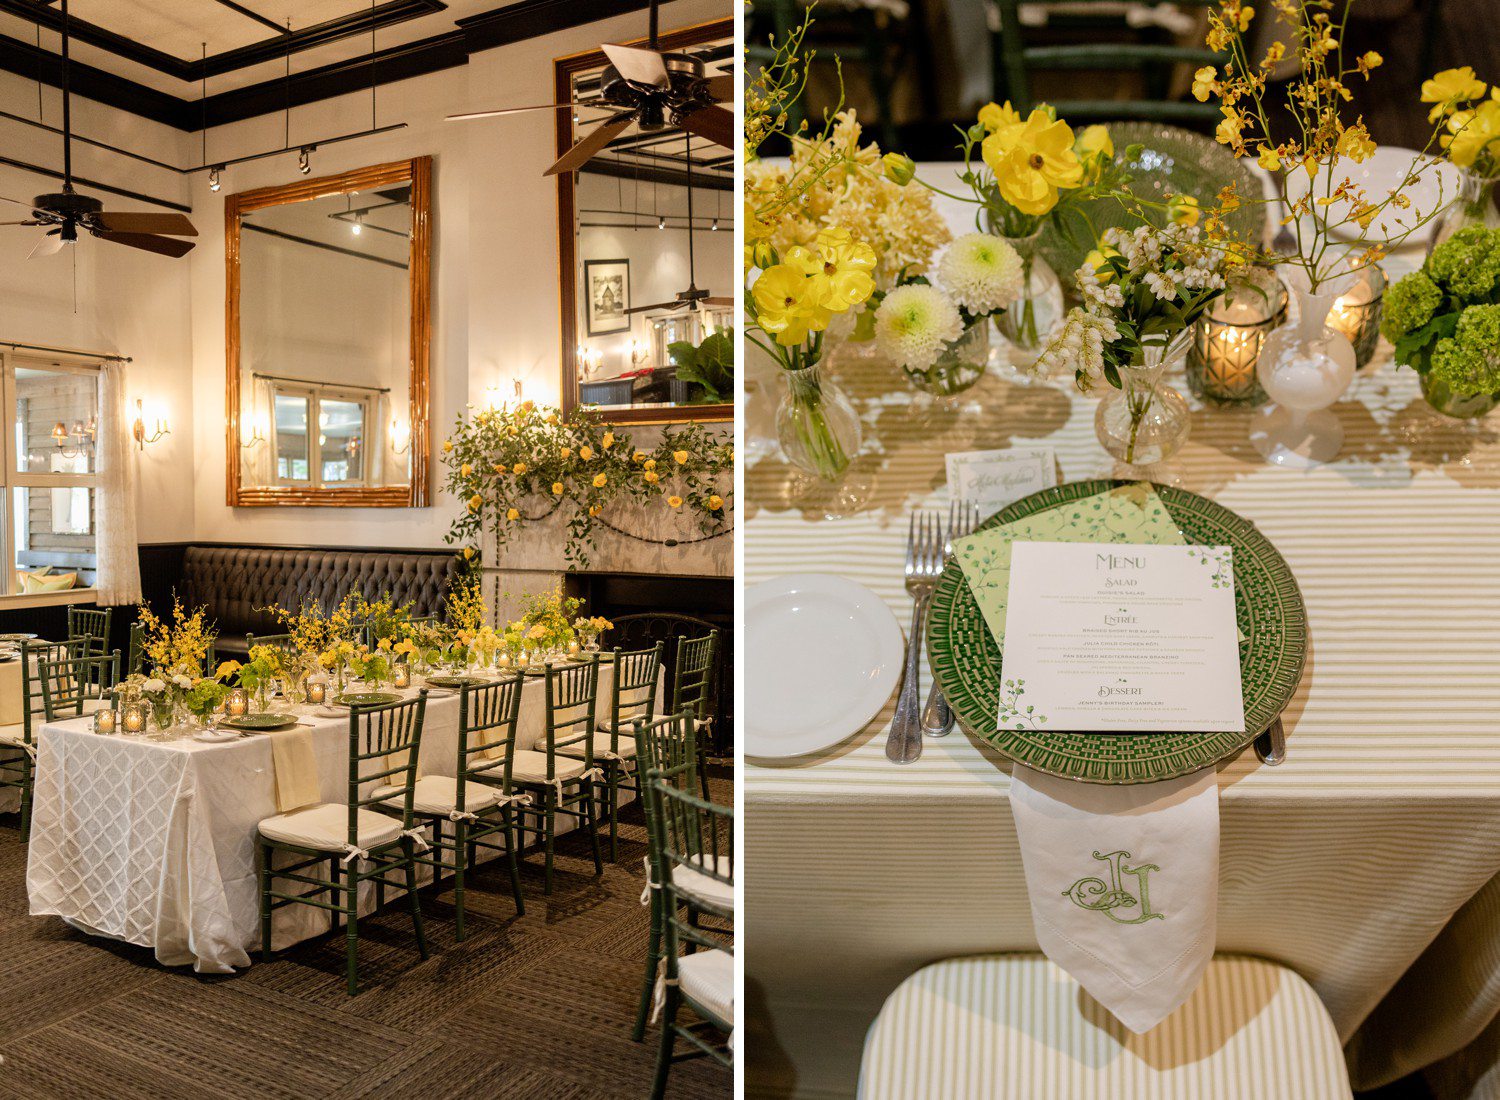 Wedding rehearsal dinner details with yellow flowers and green plates.